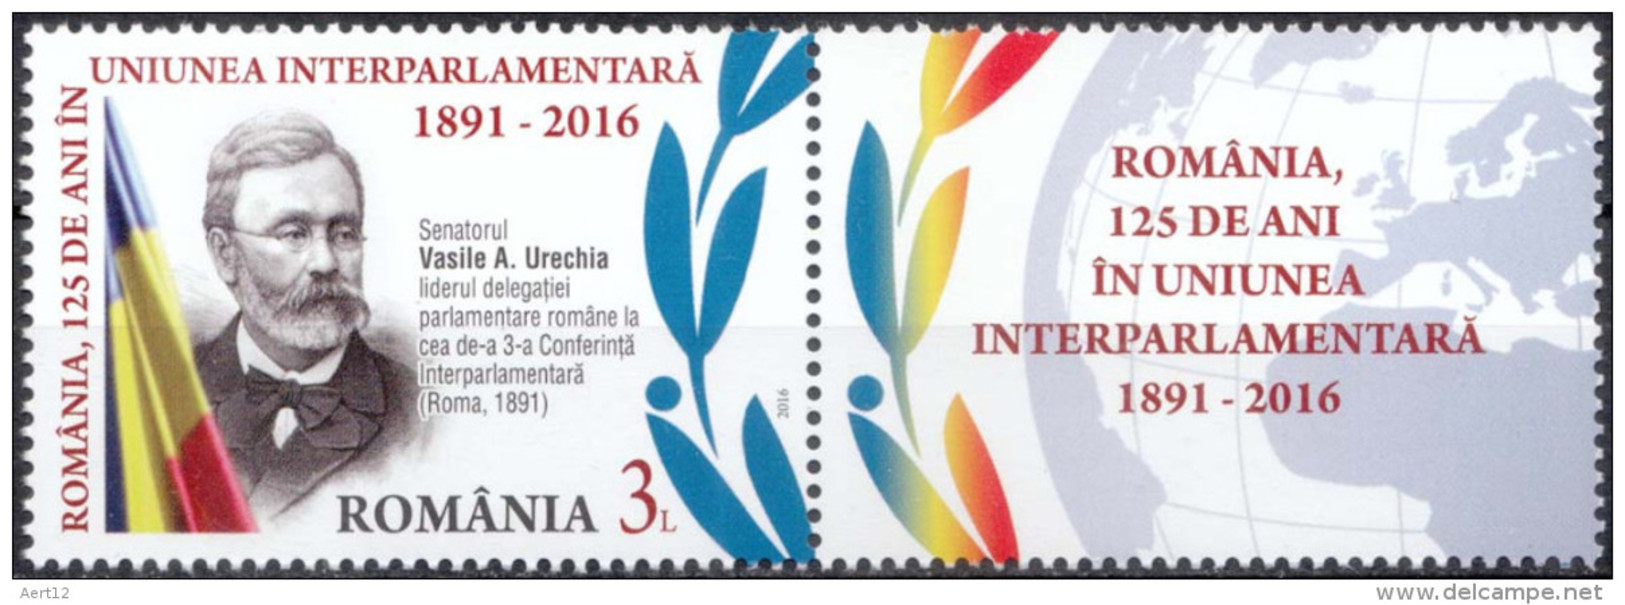 ROMANIA, 2016, 125 YEARS IN THE IPU, International Organizations, Famous People, Stamp Vith Label, MNH (**), LPMP 2101 - Nuovi